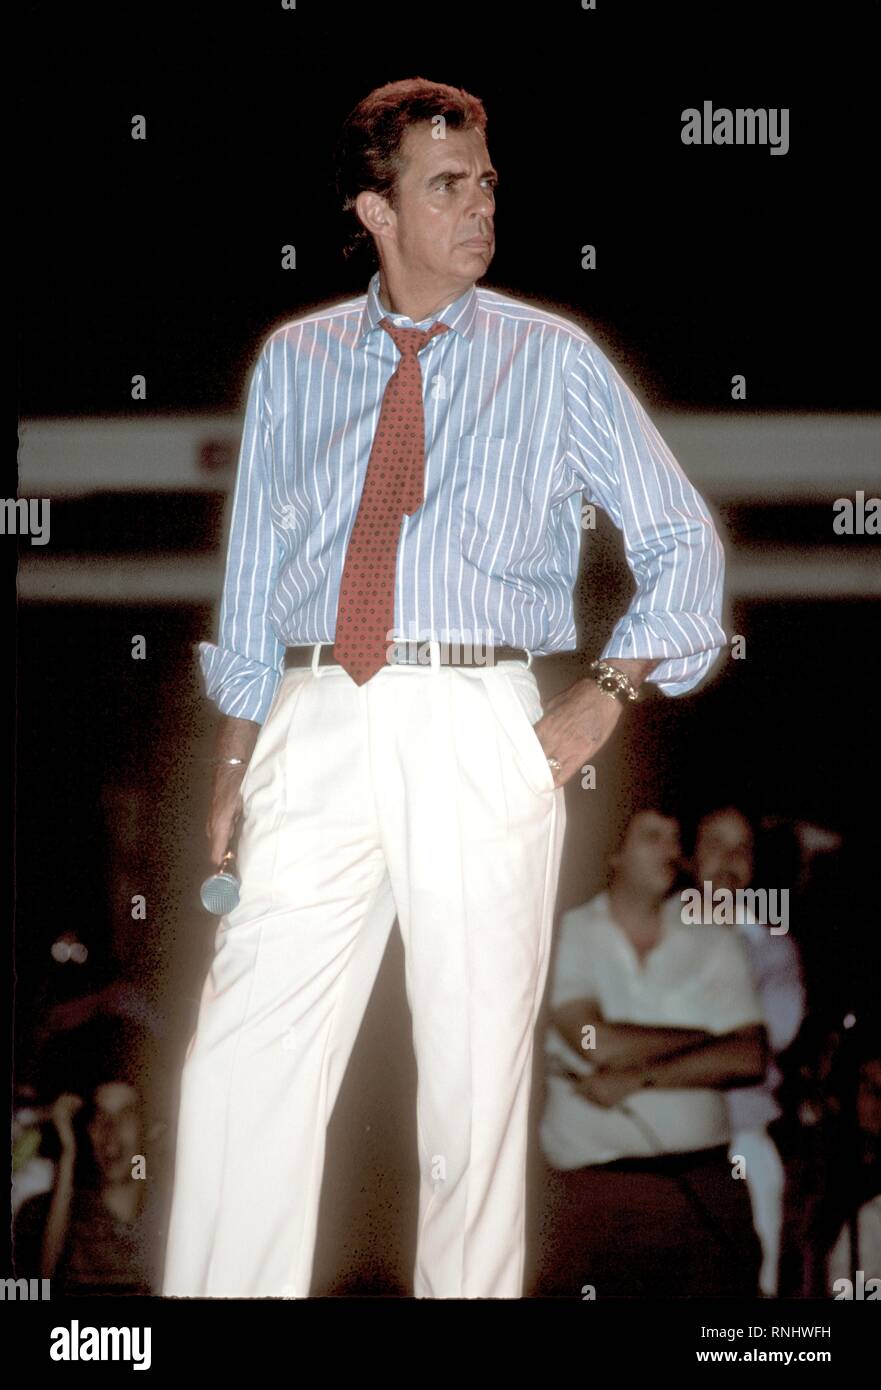 Television talk show host of the 1980s who pioneered the 'trash TV' format, Morton Downey Jr, is shown on stage during a concert appearance. Stock Photo